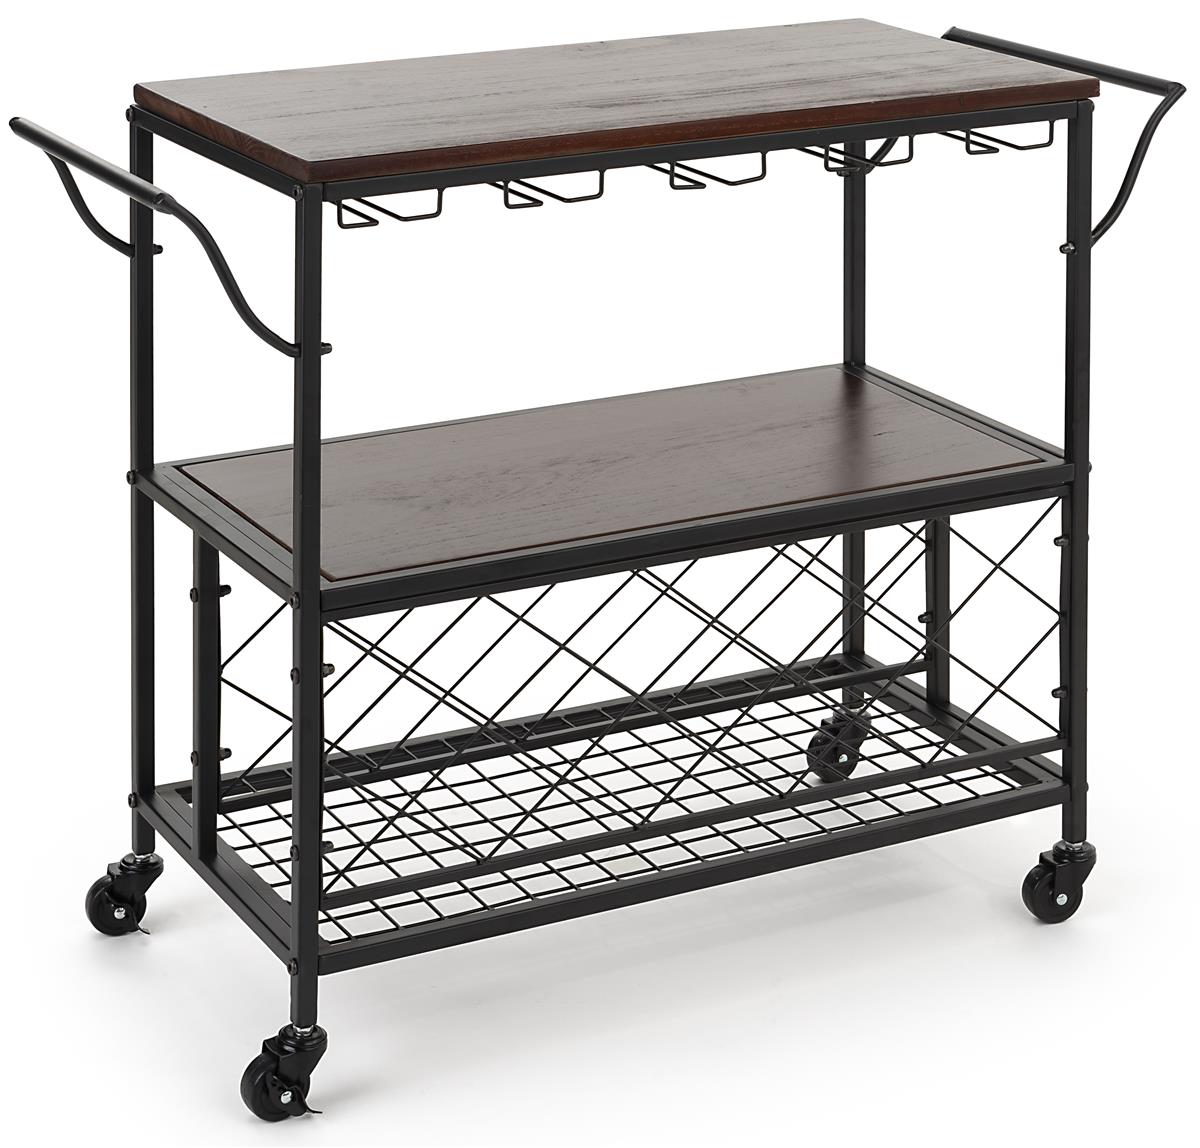 Beverage cart with wine storage features two curved handles 